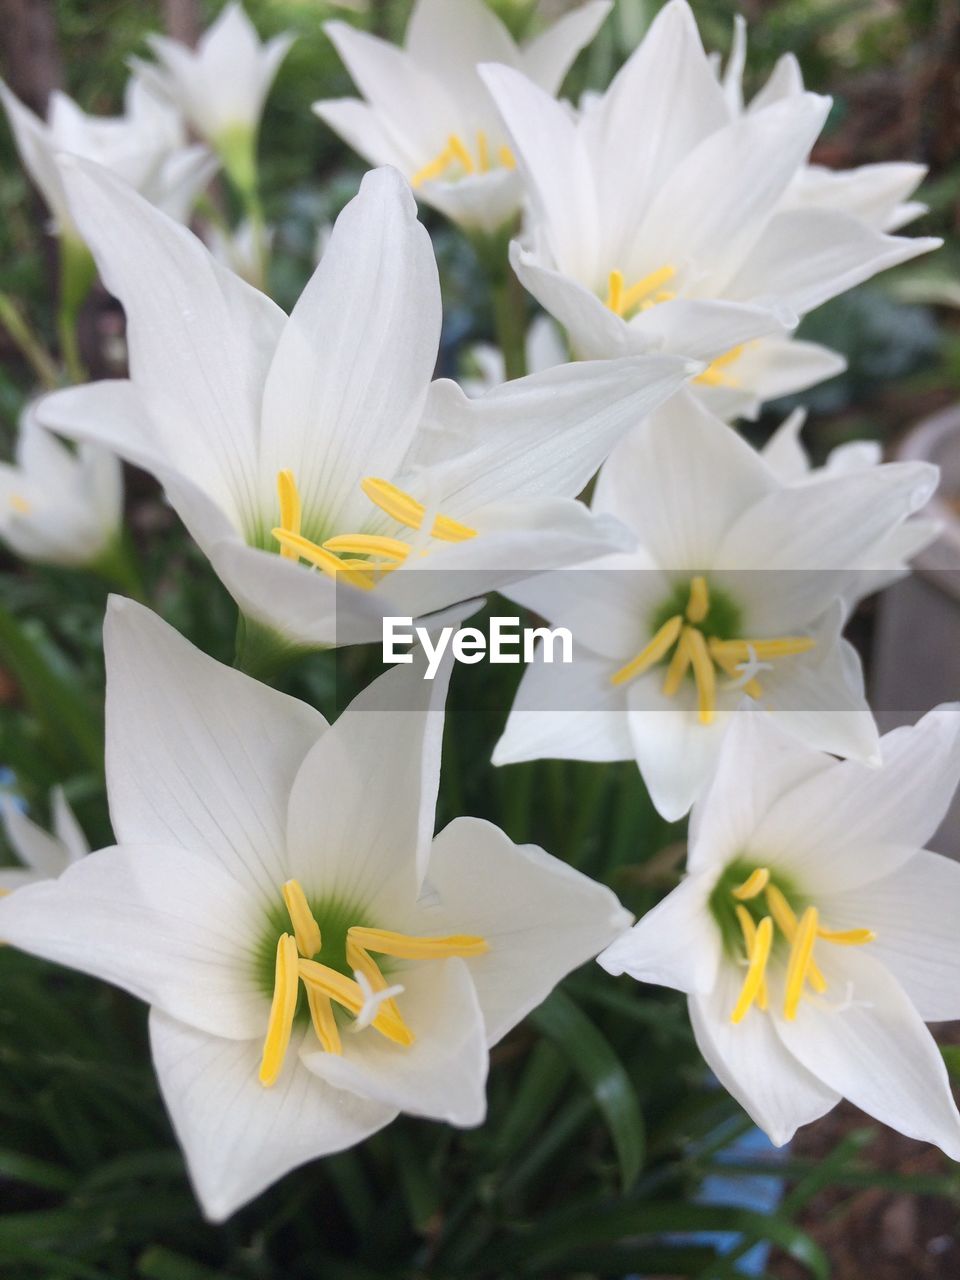 CLOSE-UP OF WHITE FLOWER BLOOMING OUTDOORS